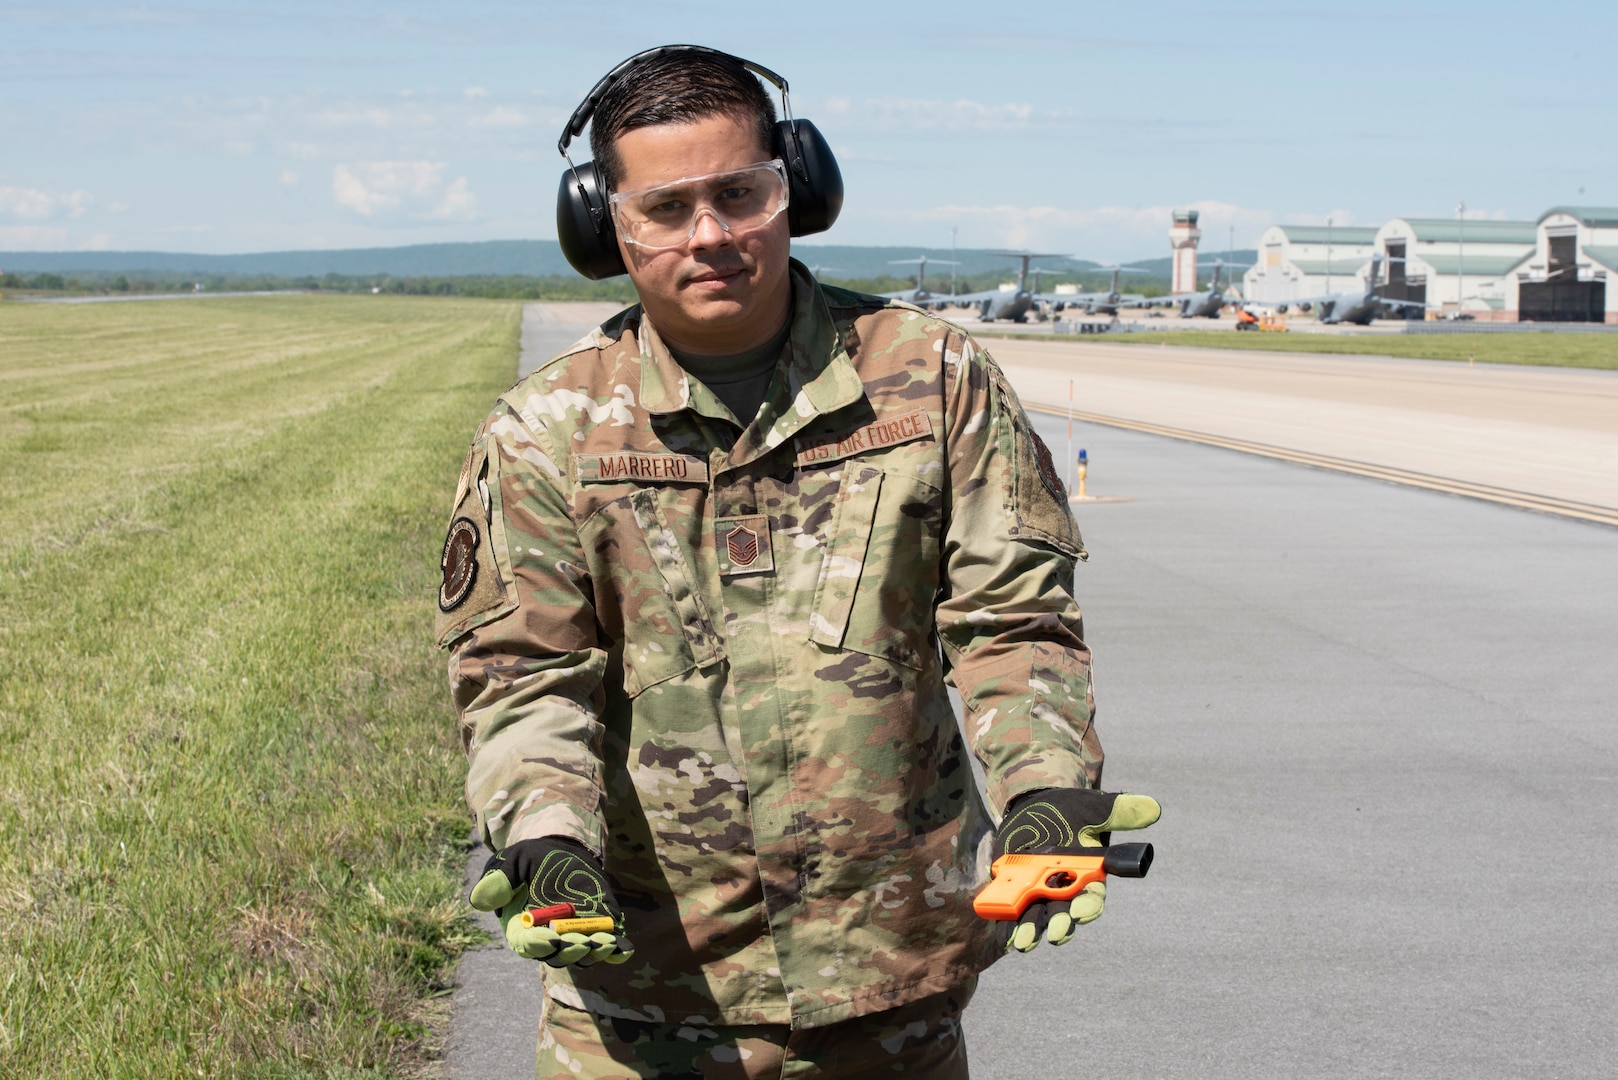 U.S. Air Force Master Sgt. Jose Marrero, noncommissioned officer in charge of airfield management with the 167th Operations Support Group, displays a pyrotechnical device with cartridges used as part of the Bird/wildlife Aircraft Strike Hazards (BASH) program, at the 167th Airlift Wing, Martinsburg, West Virginia, May 12, 2021. The airfield management team uses many noise-making devices to encourage animals to move away from the airfield.